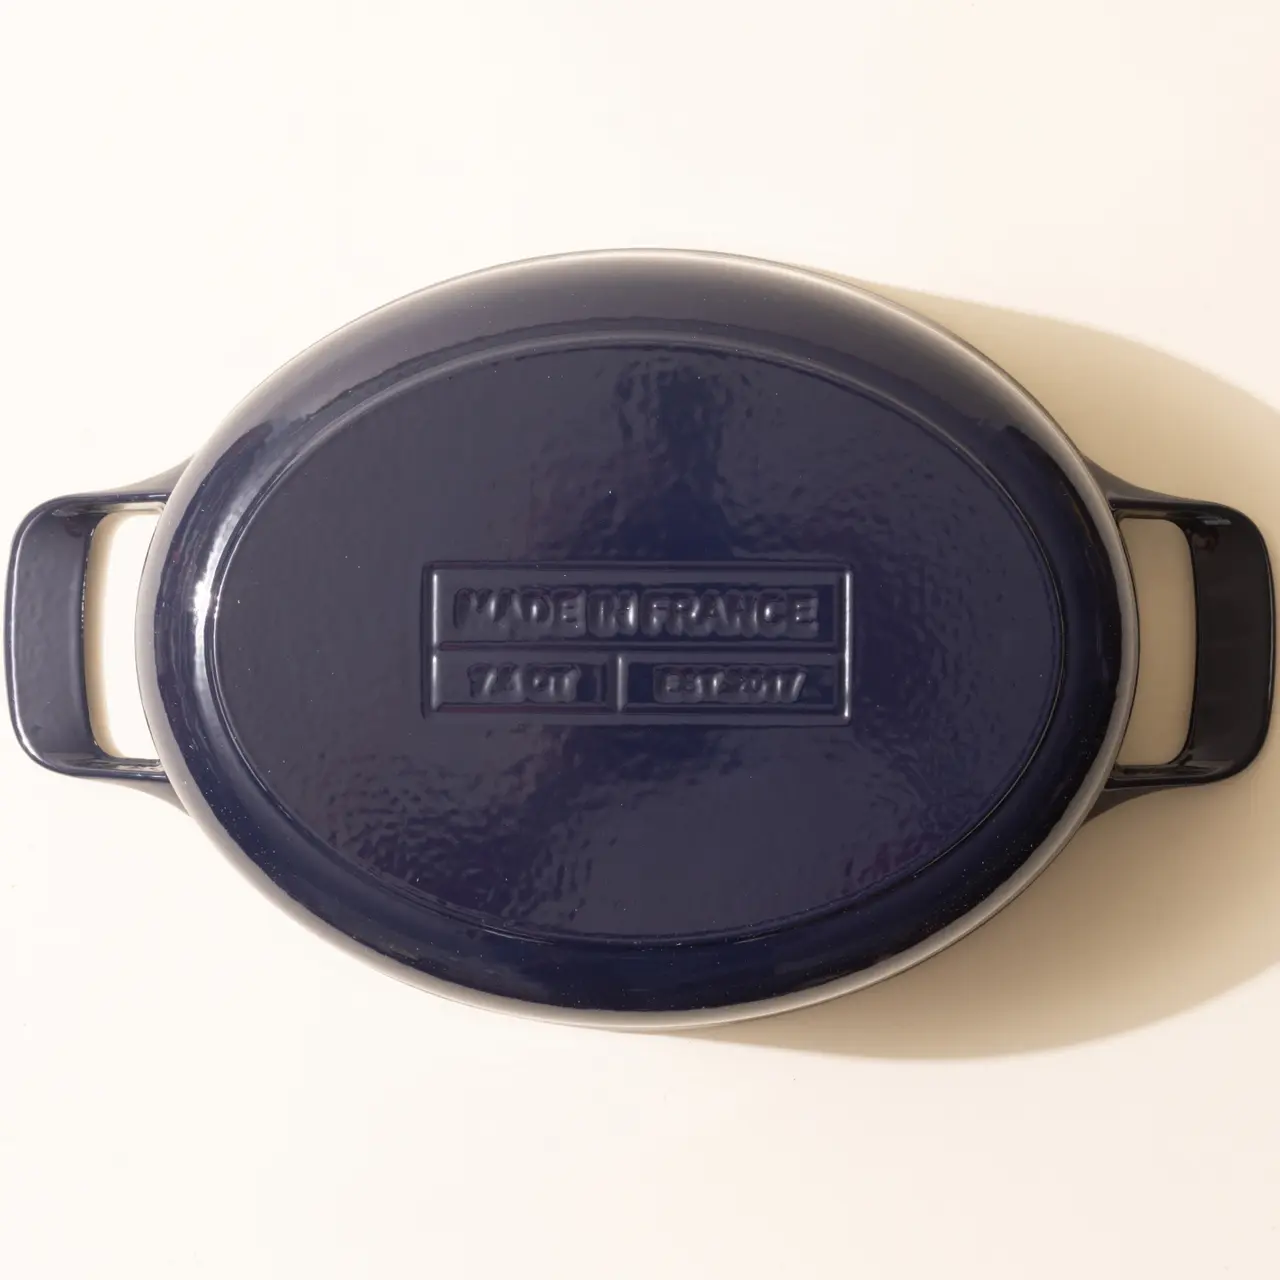 An oval, dark blue, enameled cast iron casserole dish with side handles sits against a light background.